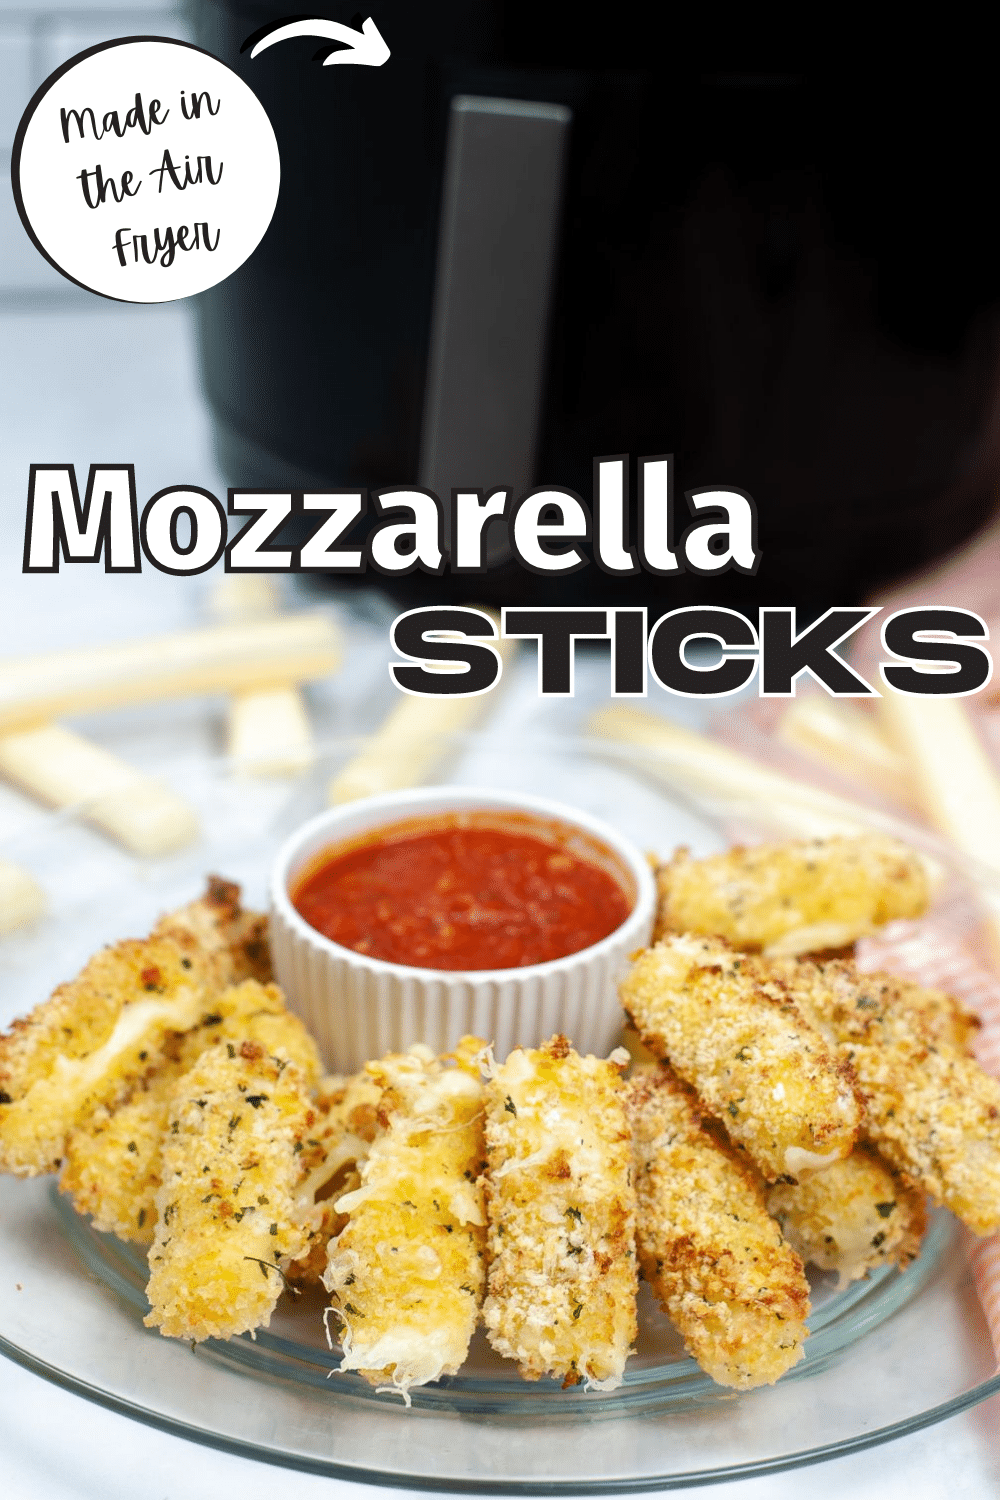 These homemade Air Fryer Mozzarella Sticks are so much better than frozen ones from the store. They're crispy outside & cheesy inside. #mozzarellasticks #homemade #airfryer #appetizers #recipe via @wondermomwannab